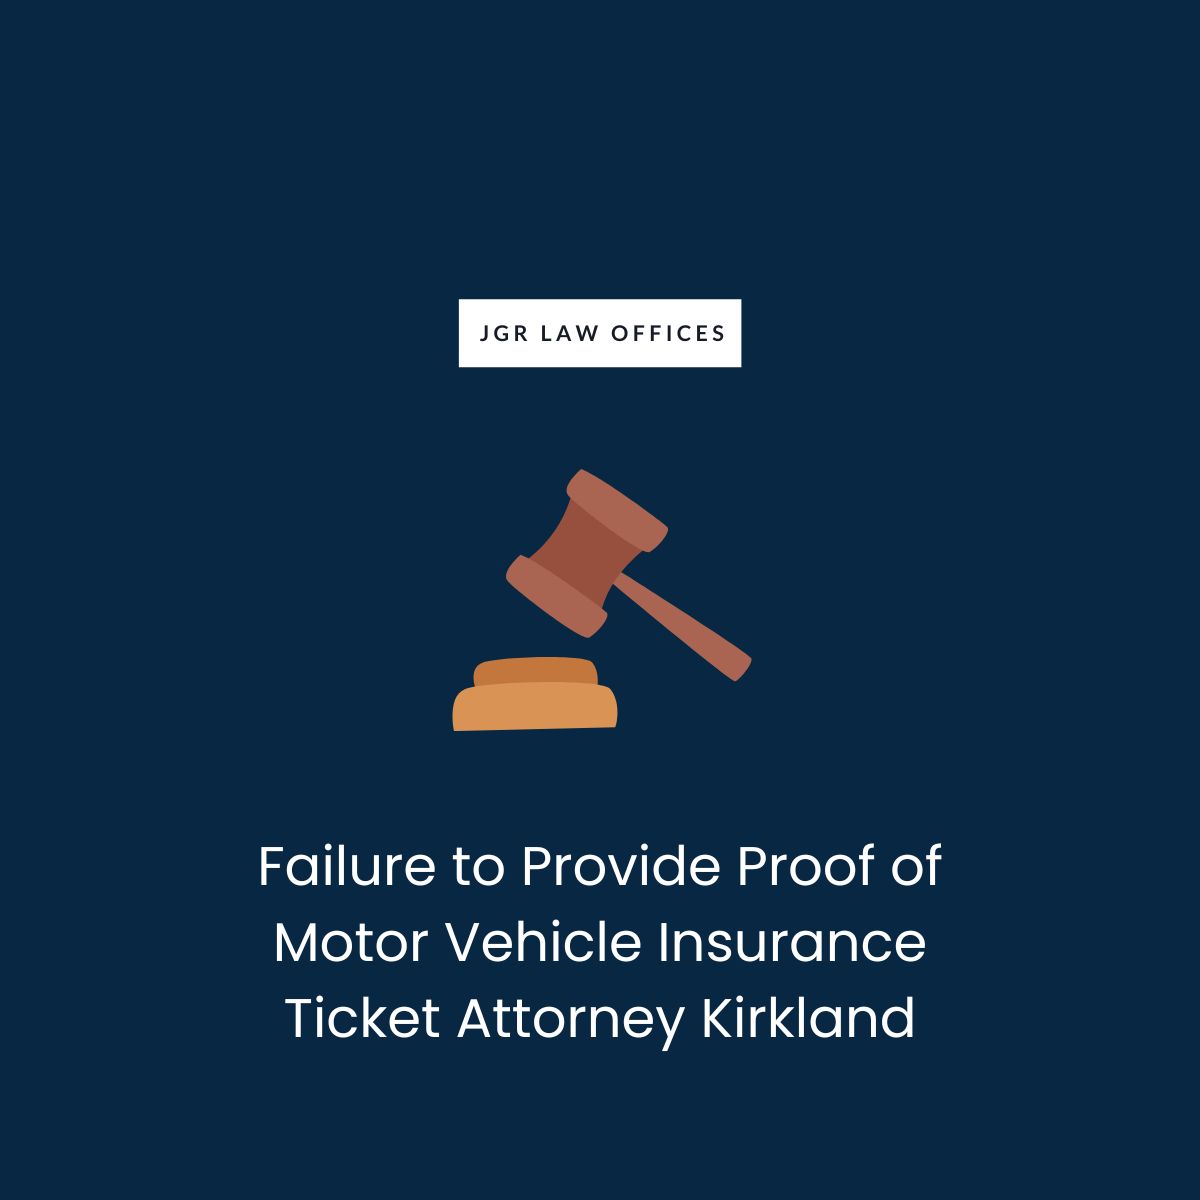 Failure to Provide Proof of Motor Vehicle Insurance Ticket Attorney Kirkland